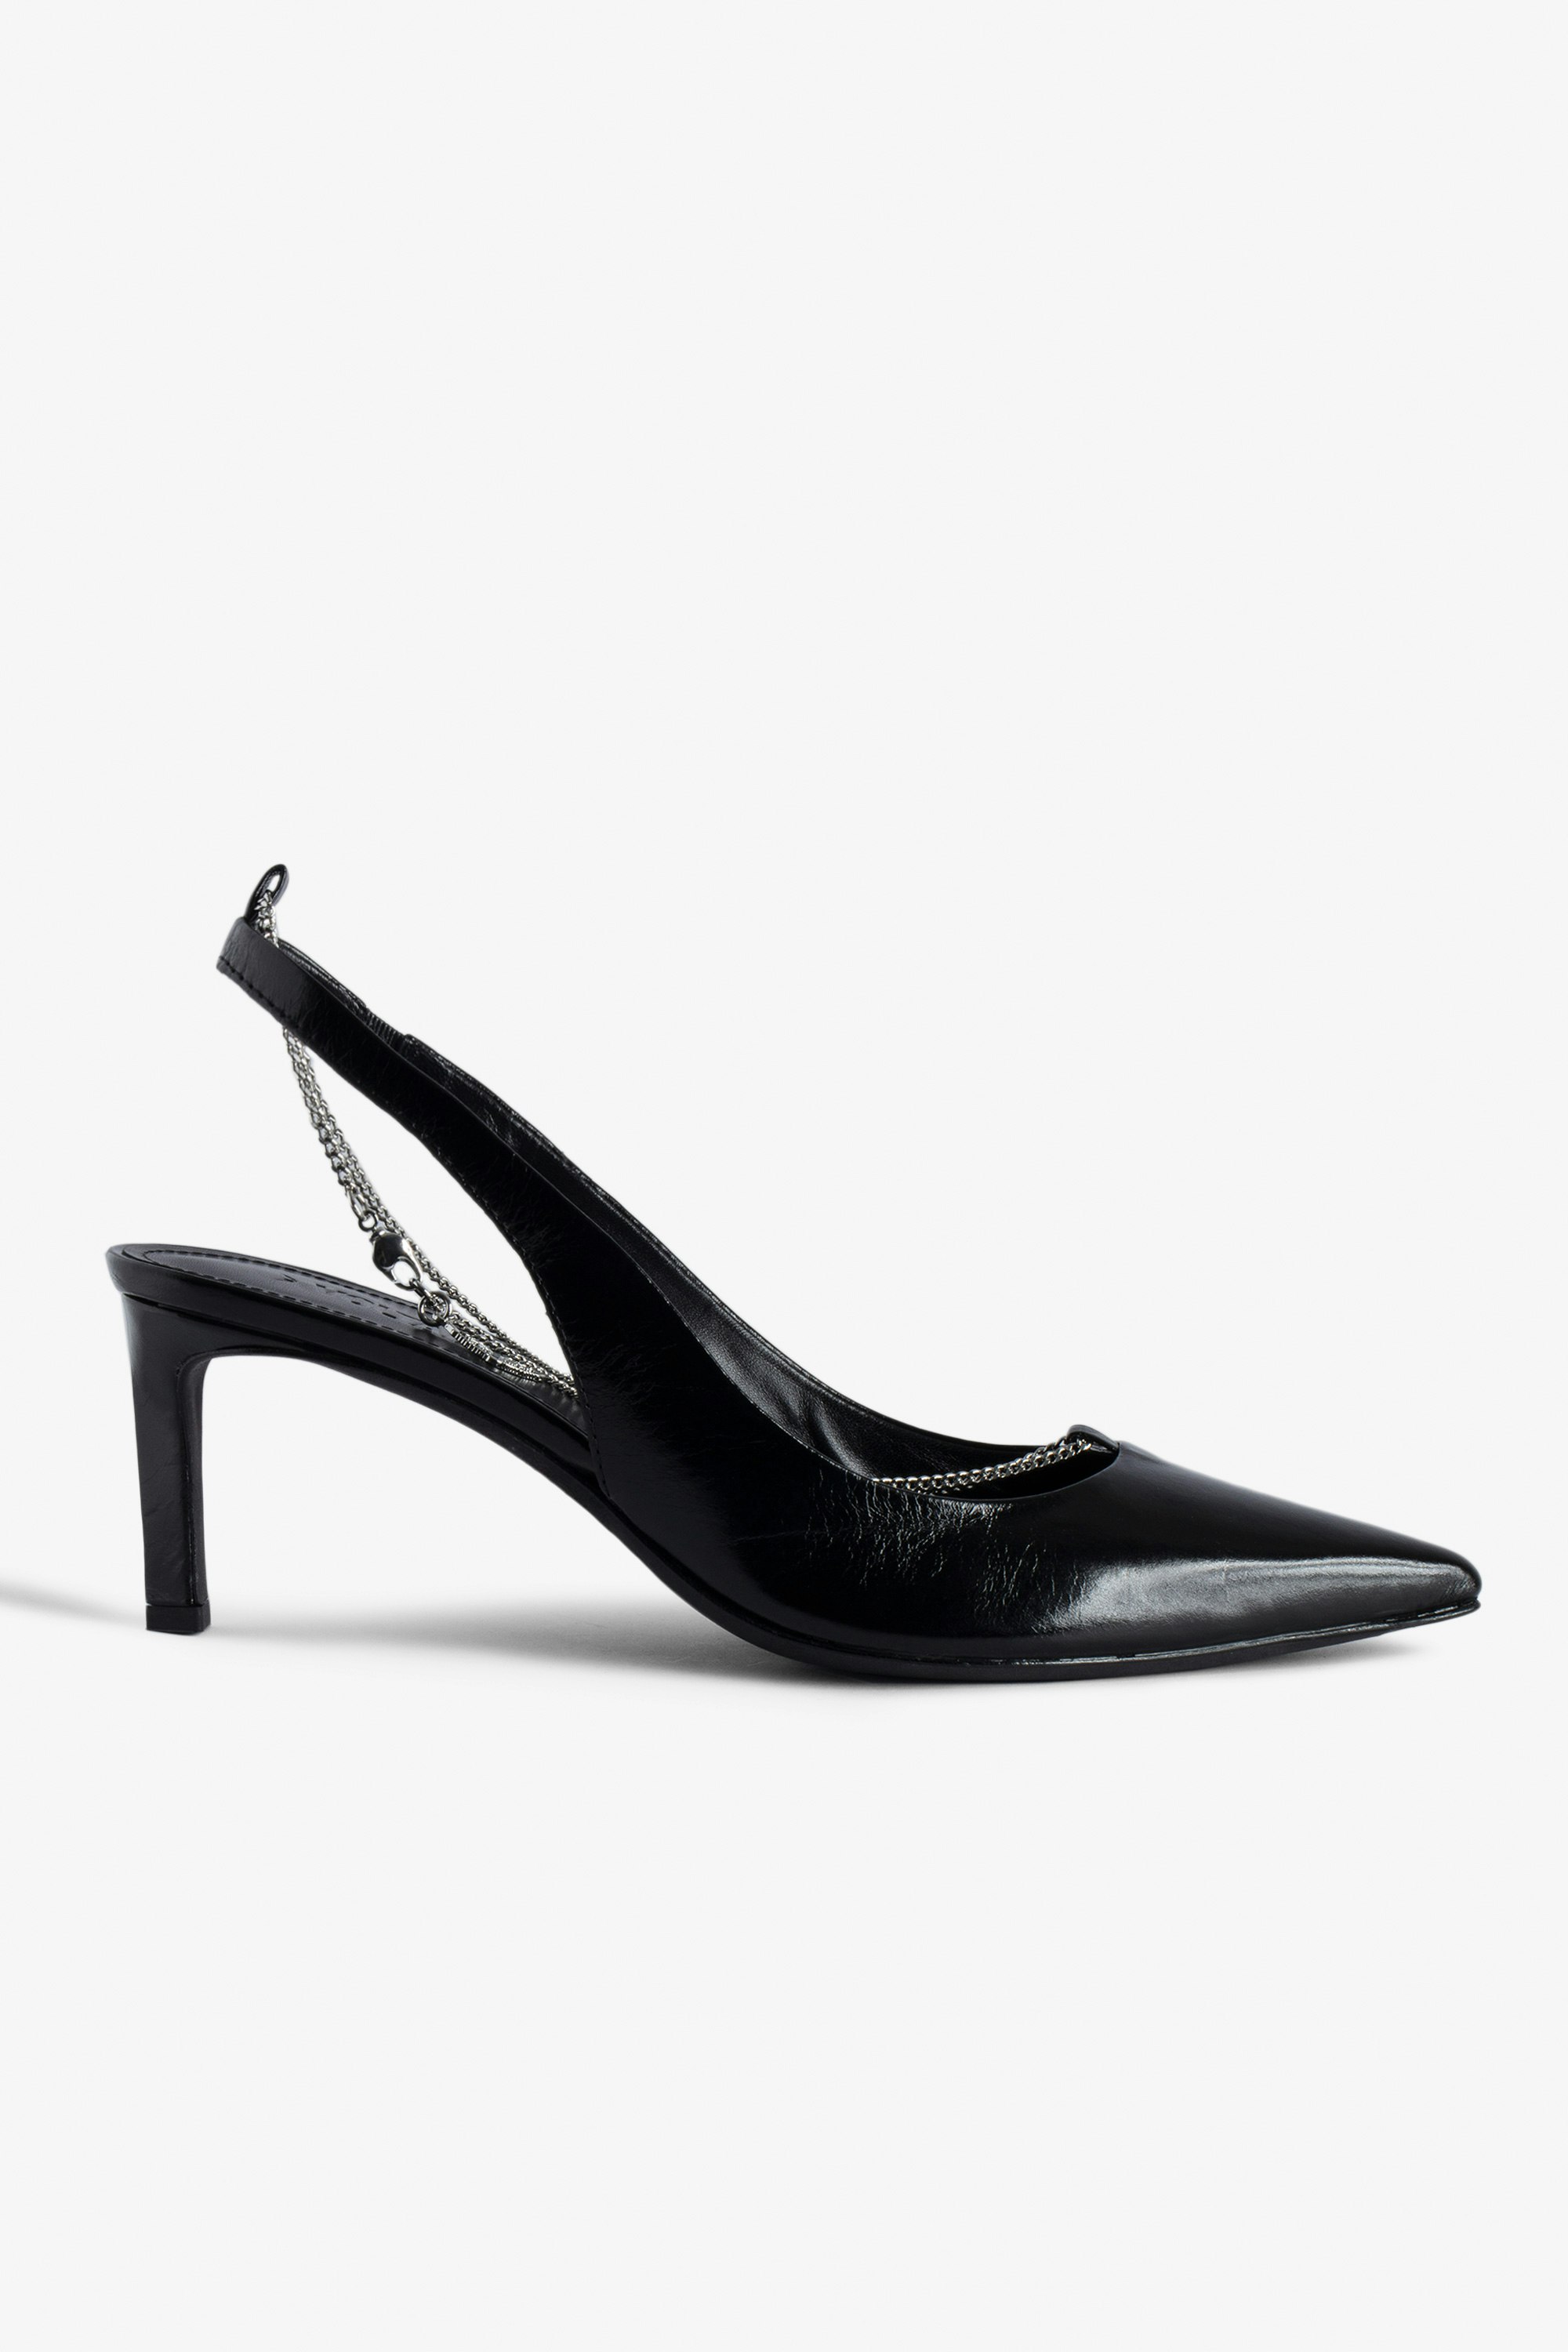 First Night Court Shoes - Black vintage-effect leather court shoes with leather strap and metal chain.